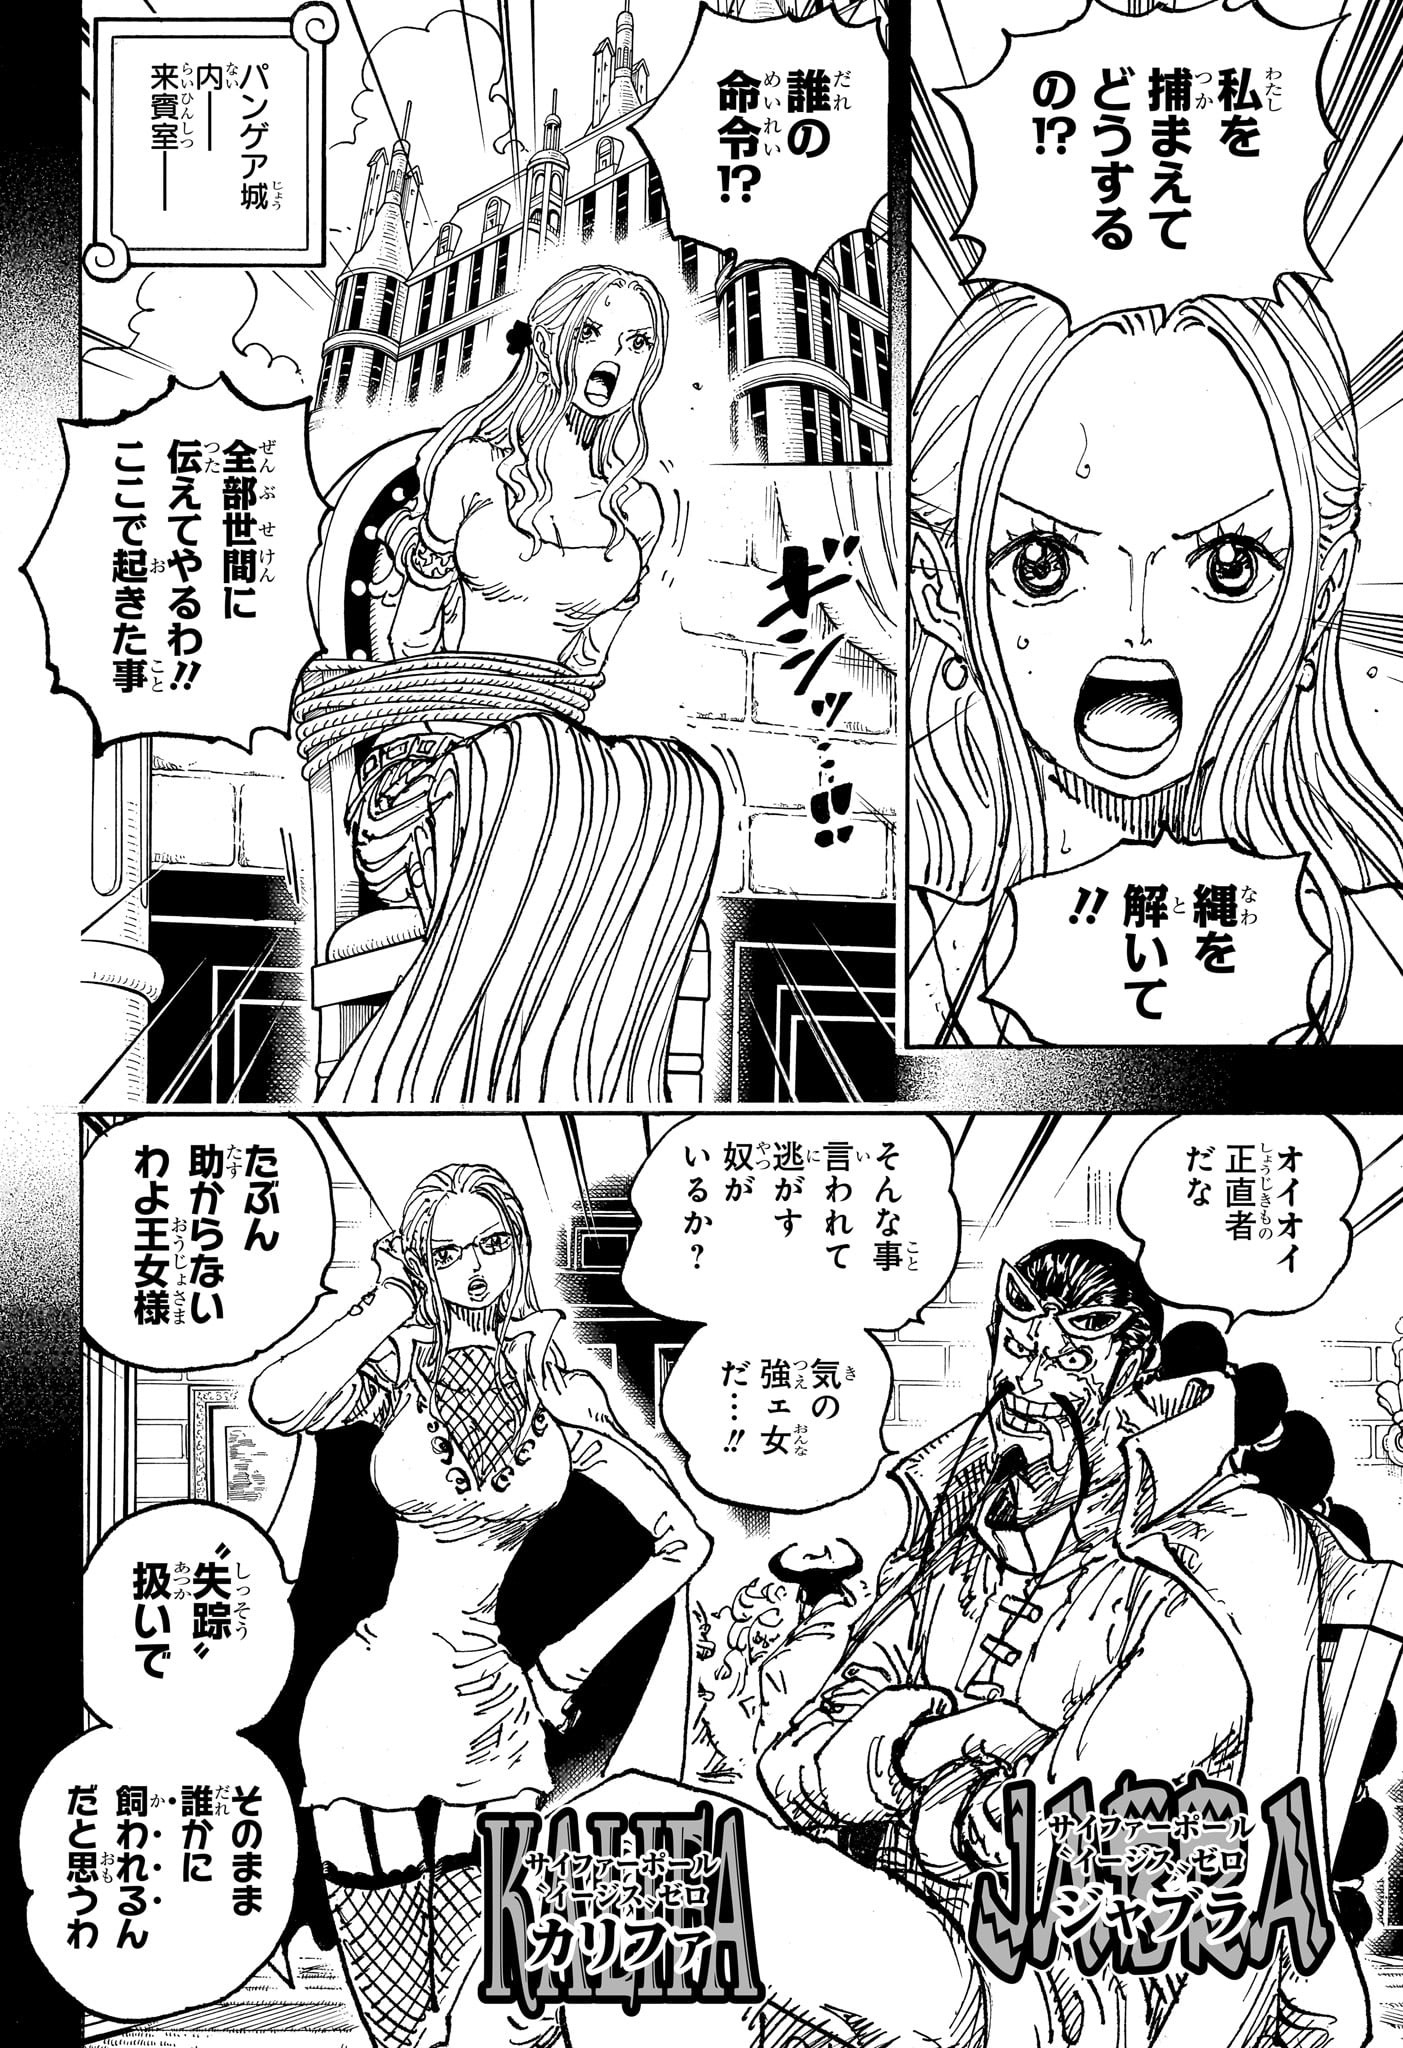 One Piece - Chapter 1085 - Page 14